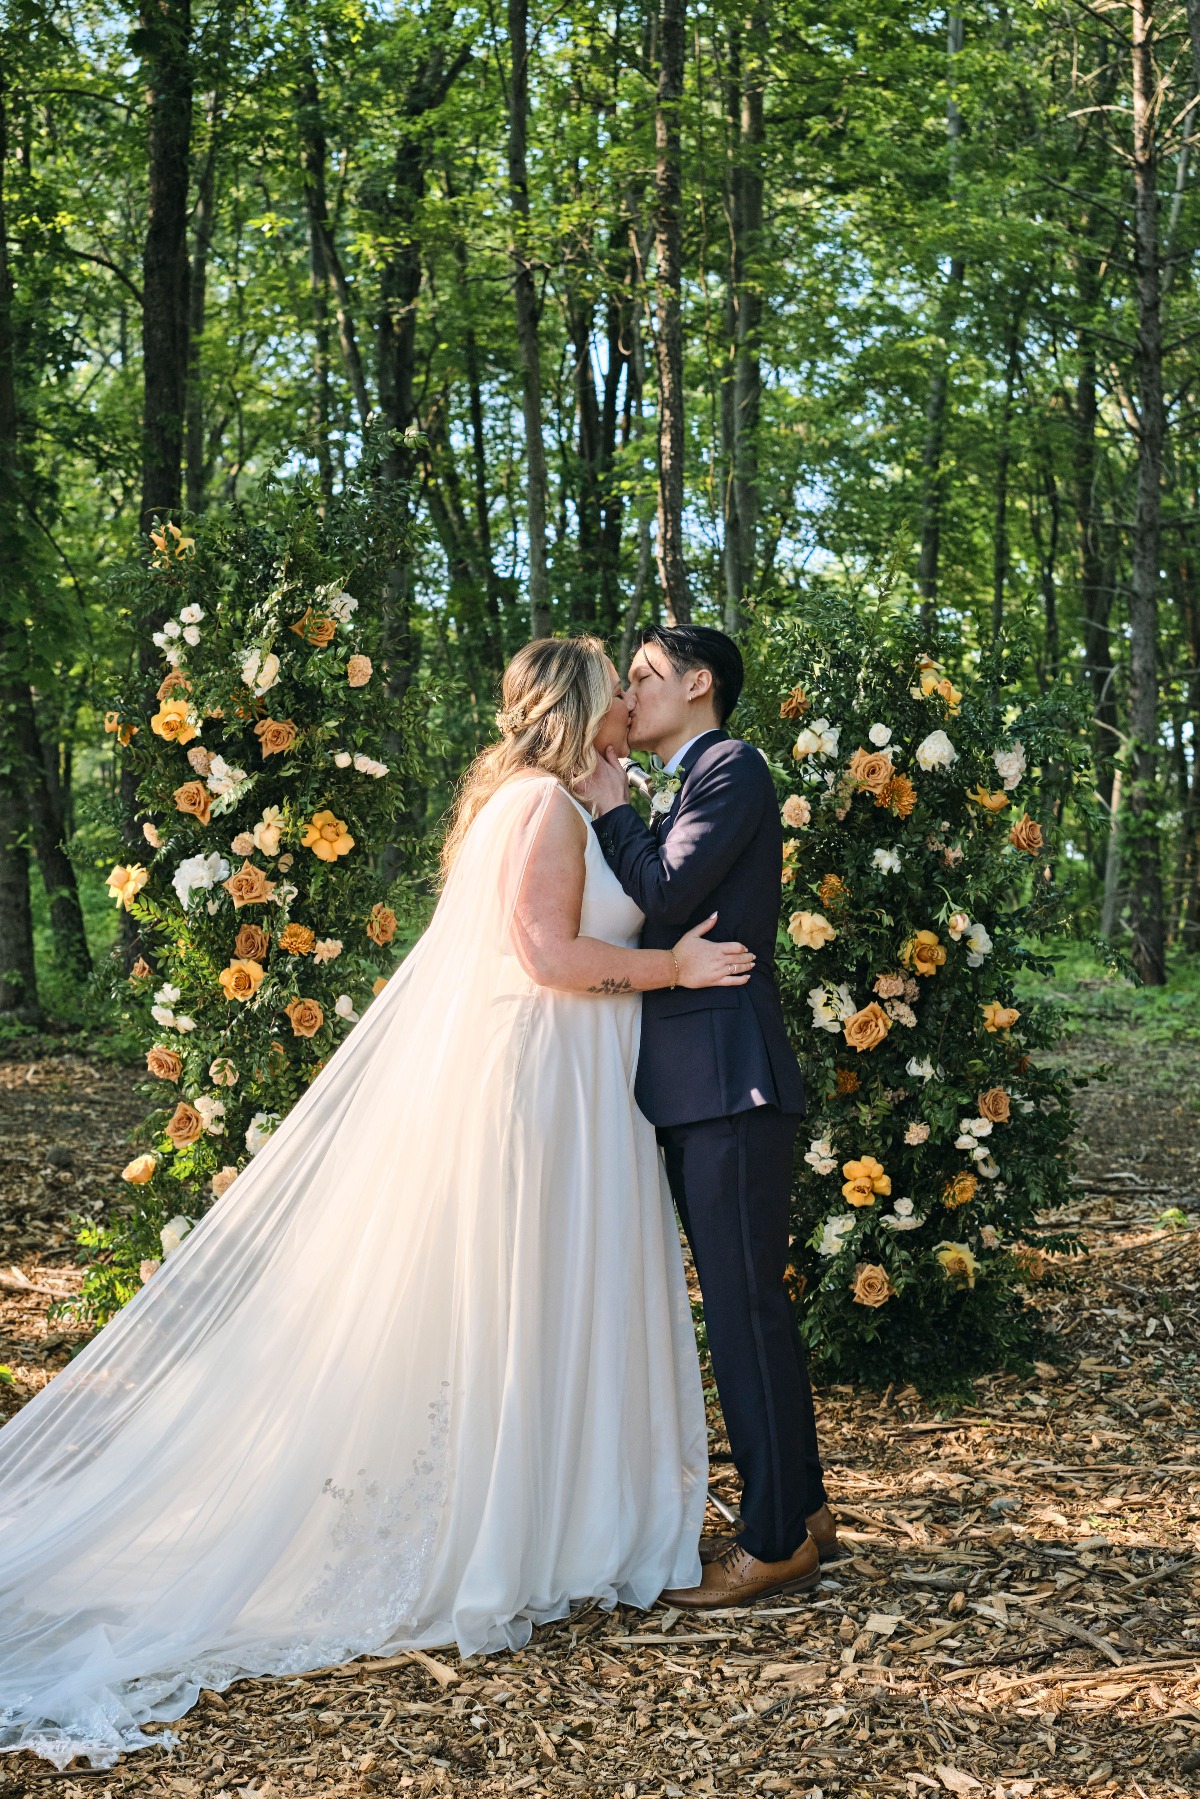 Romantic first kiss at New York wedding ceremony in forest